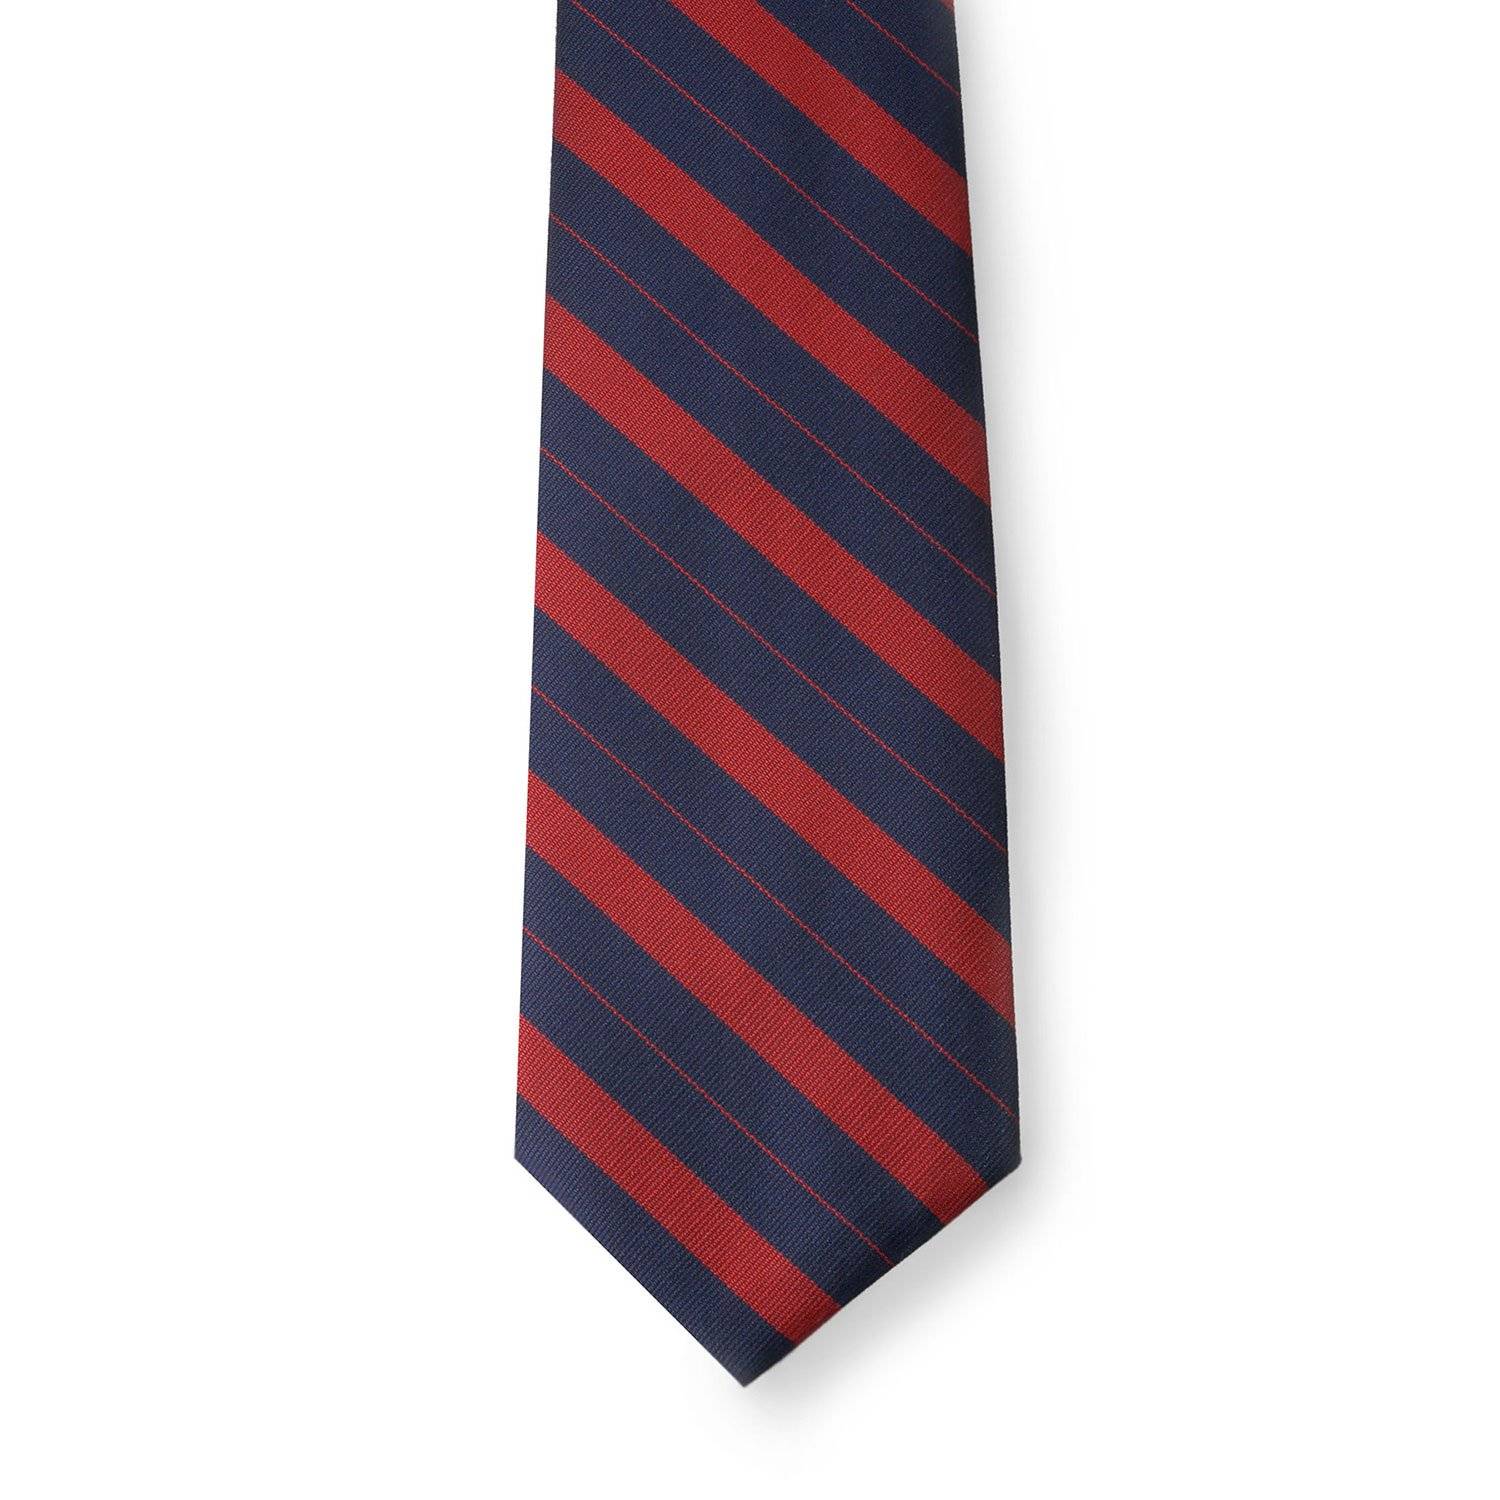 LAWPRO STRIPED COLOR CLIP ON TIES